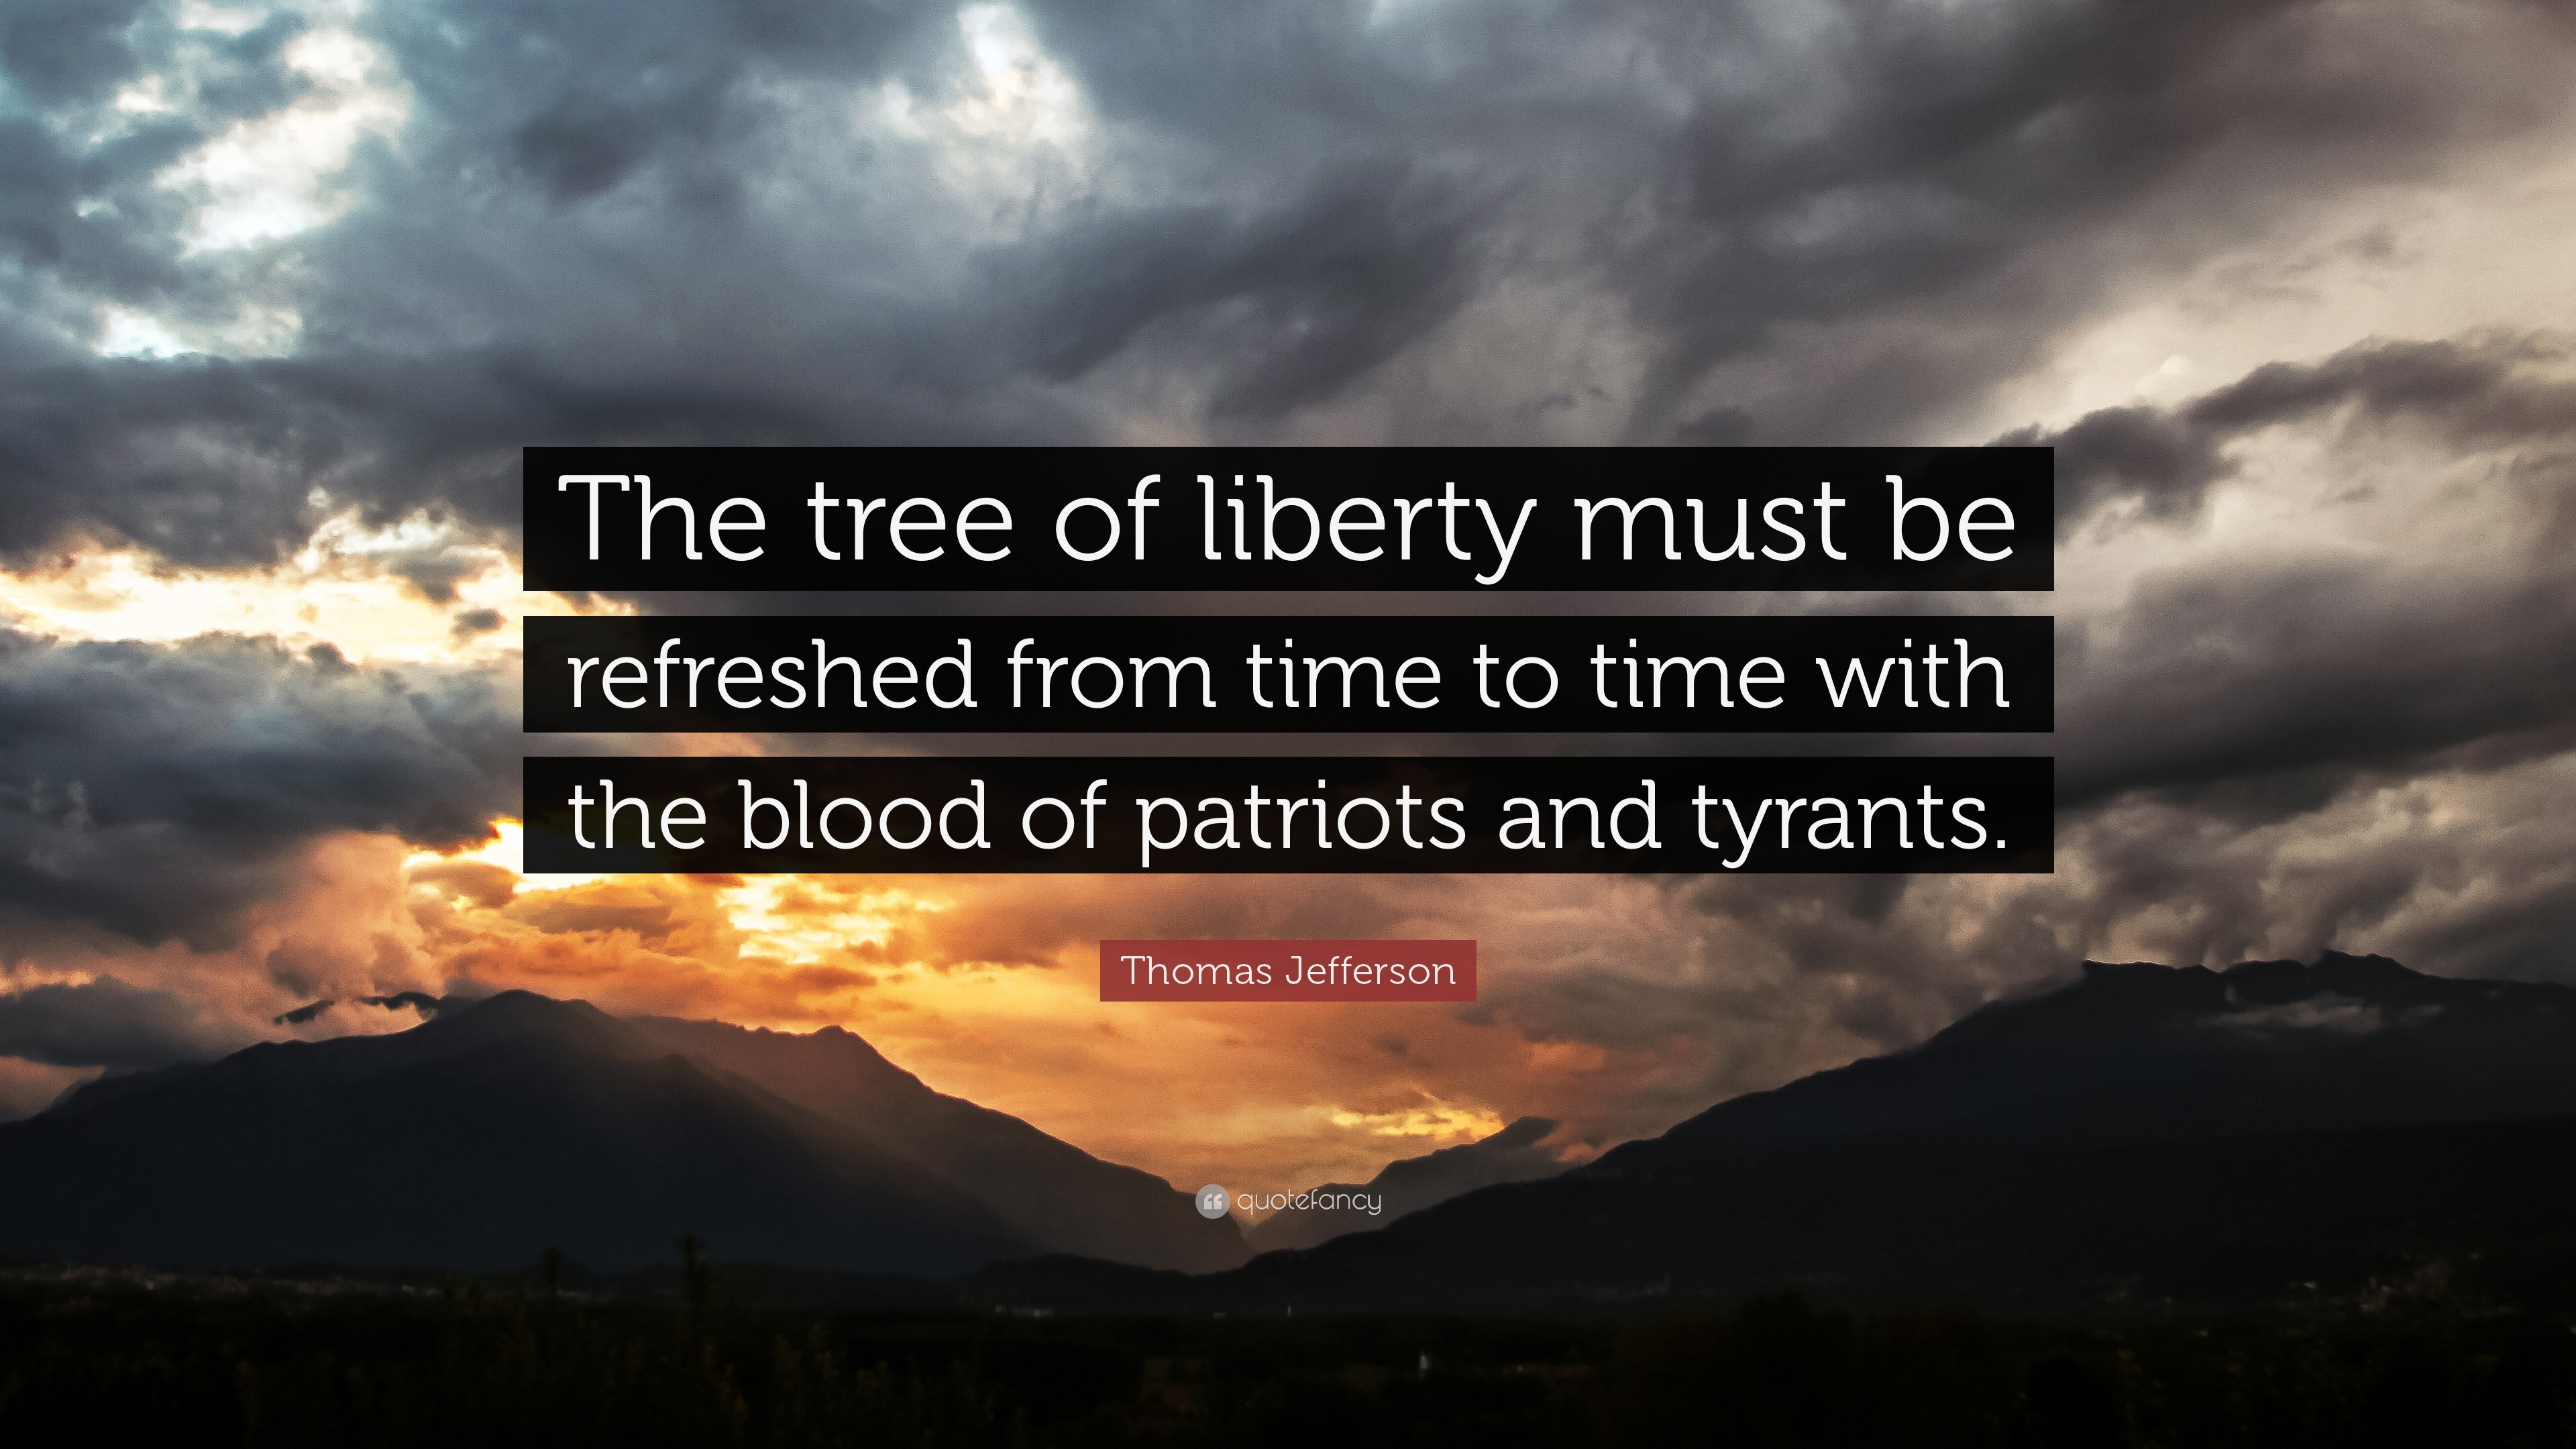 Thomas Jefferson Quote: “The tree of liberty must be refreshed from time to time with the